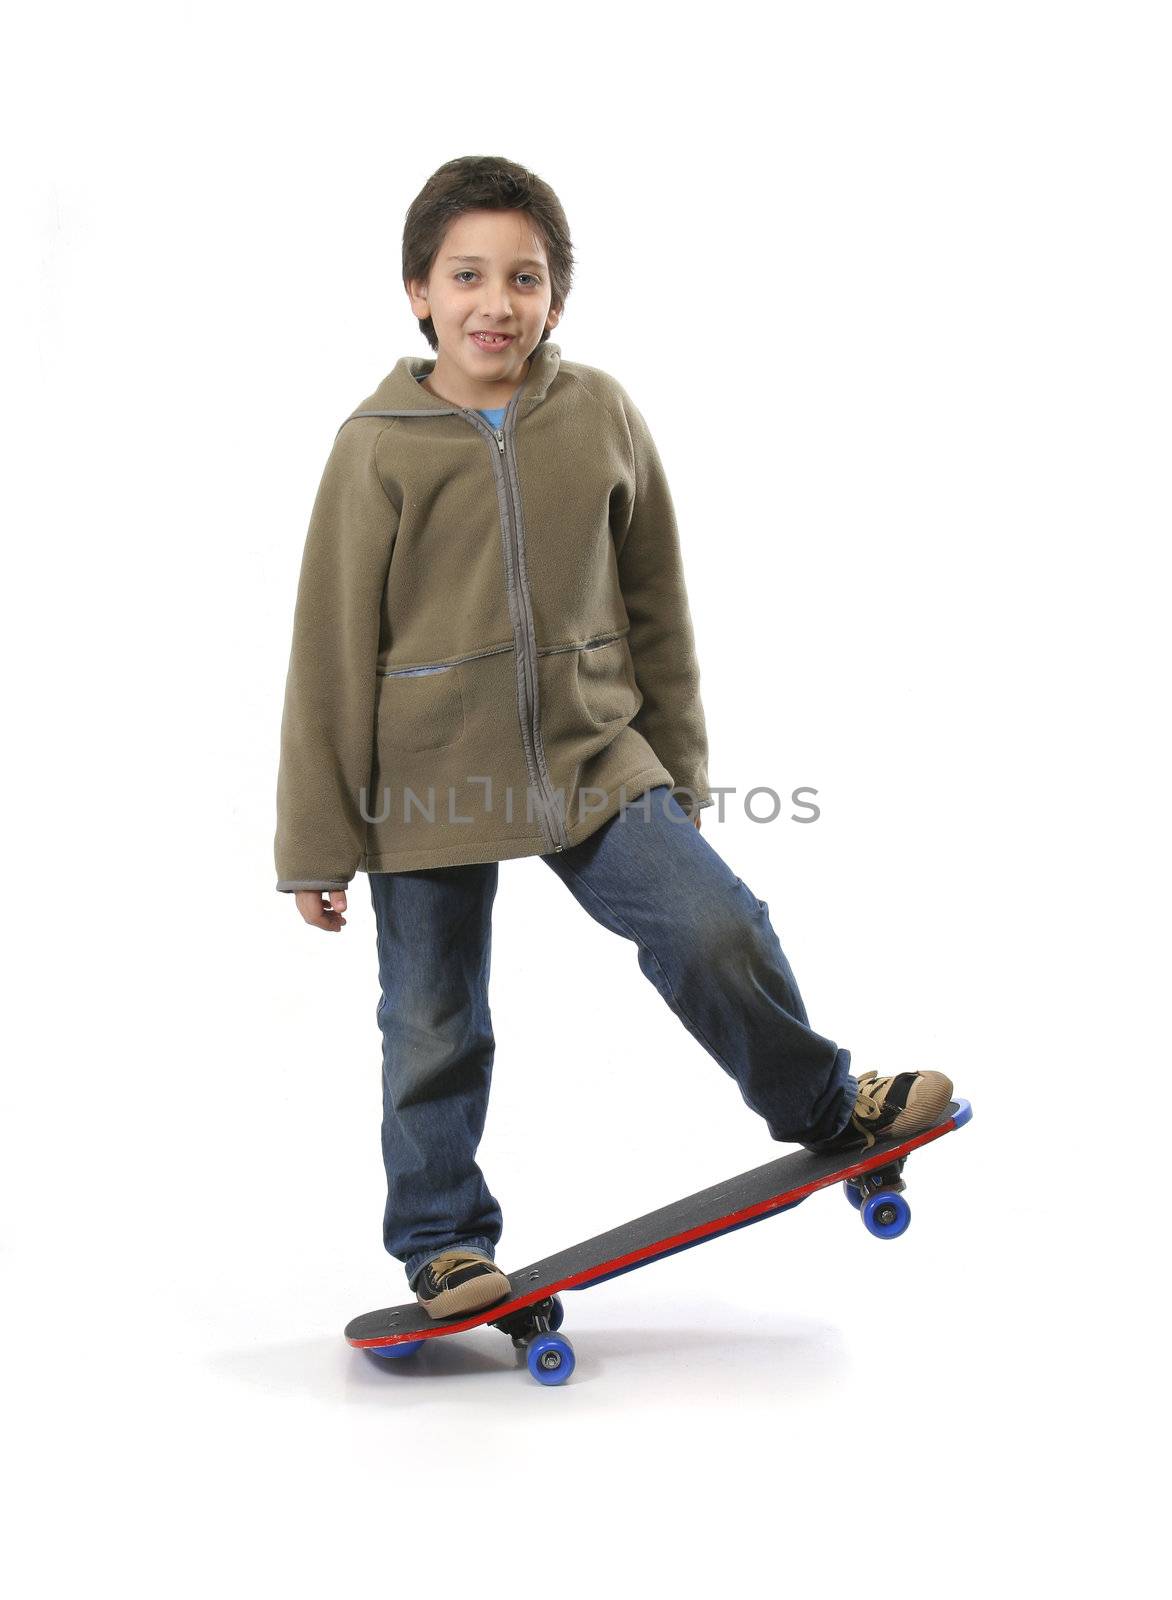 Cool boy skateboarding. Full boy, white background. More pictures of this model at my gallery